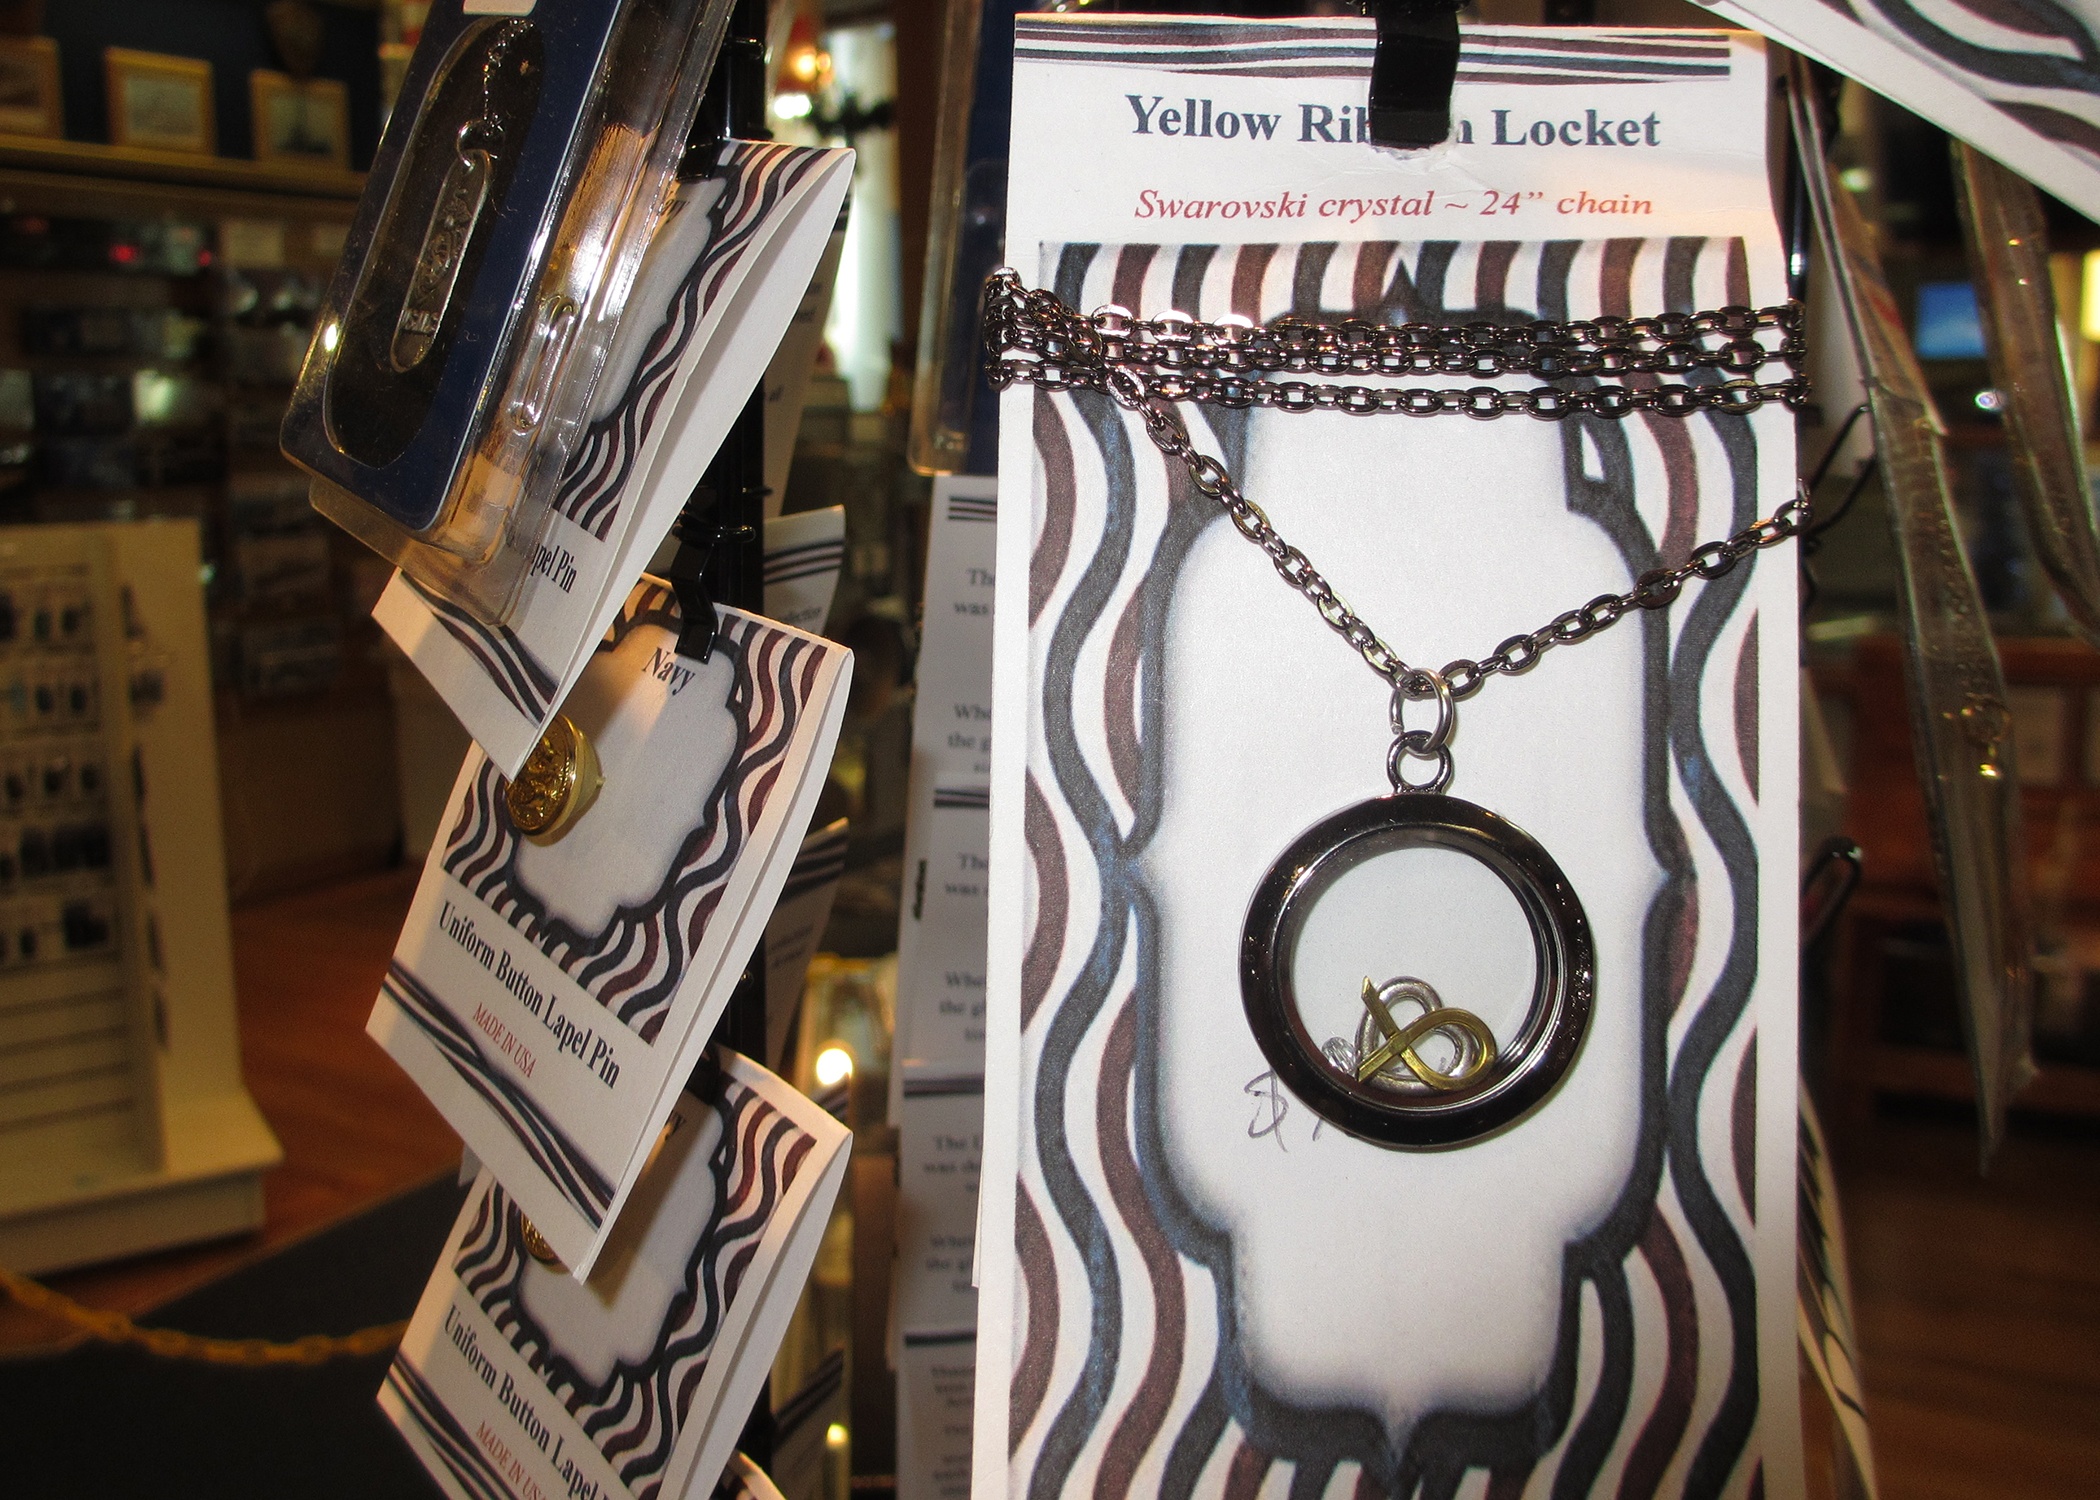 Mothers and wives will love a Yellow Ribbon Locket with a Swarovski crystal this Christmas. Stop by to see all of our military inspired jewelry. 